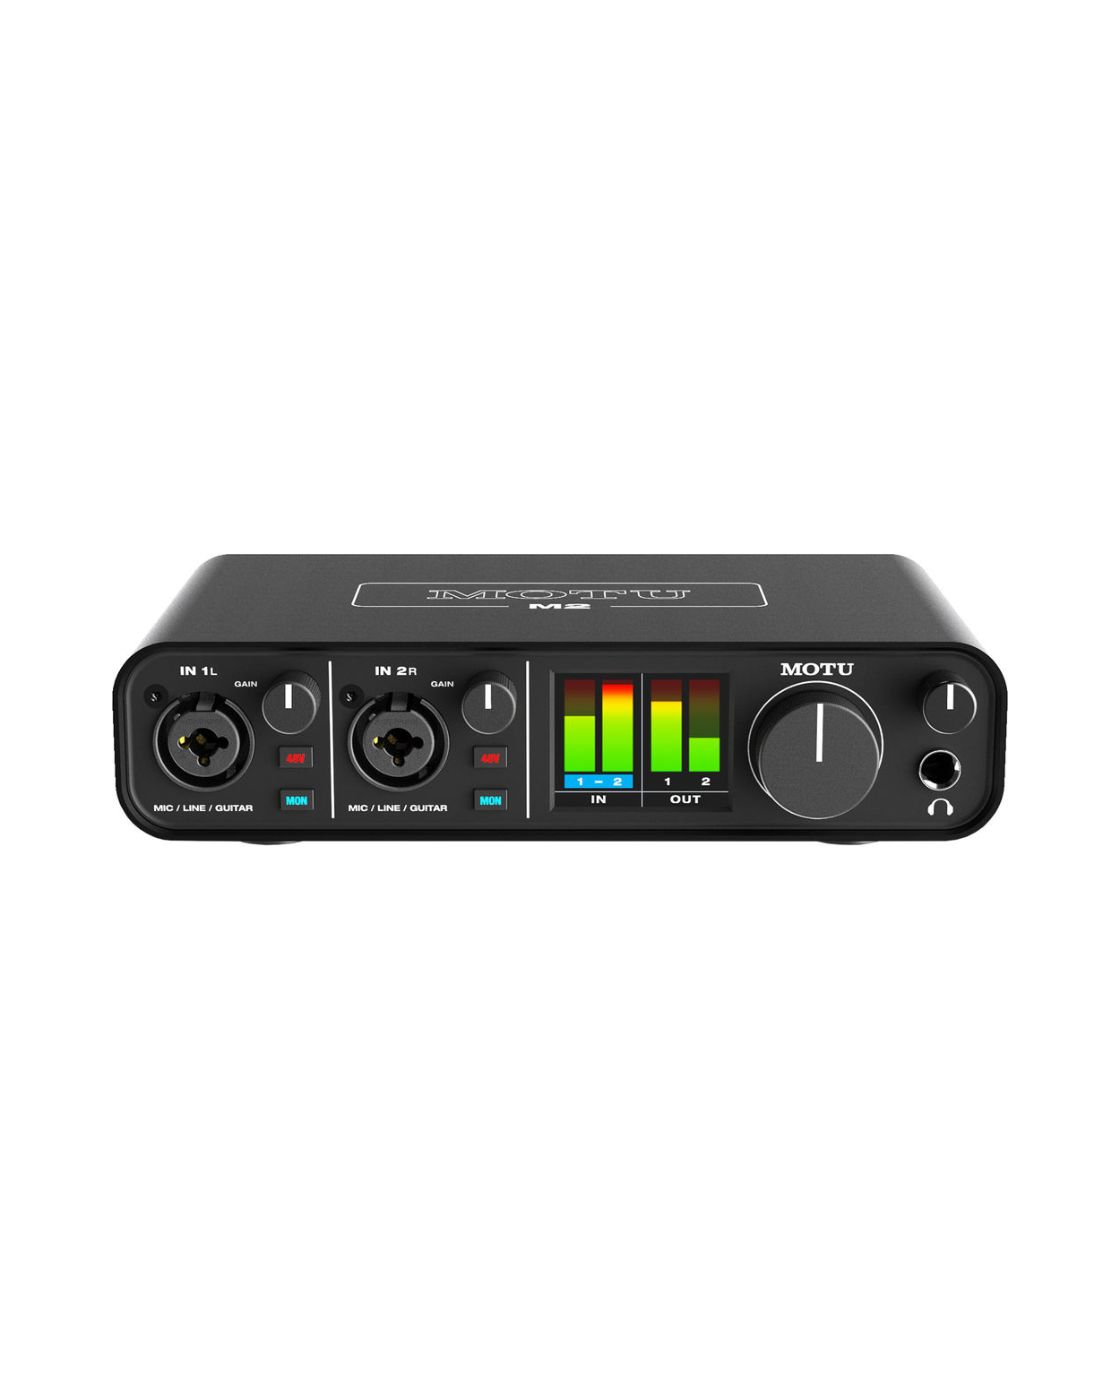 MOTU M2 DIGITAL AUDIO INTERFACE for sale at auction on 19th January